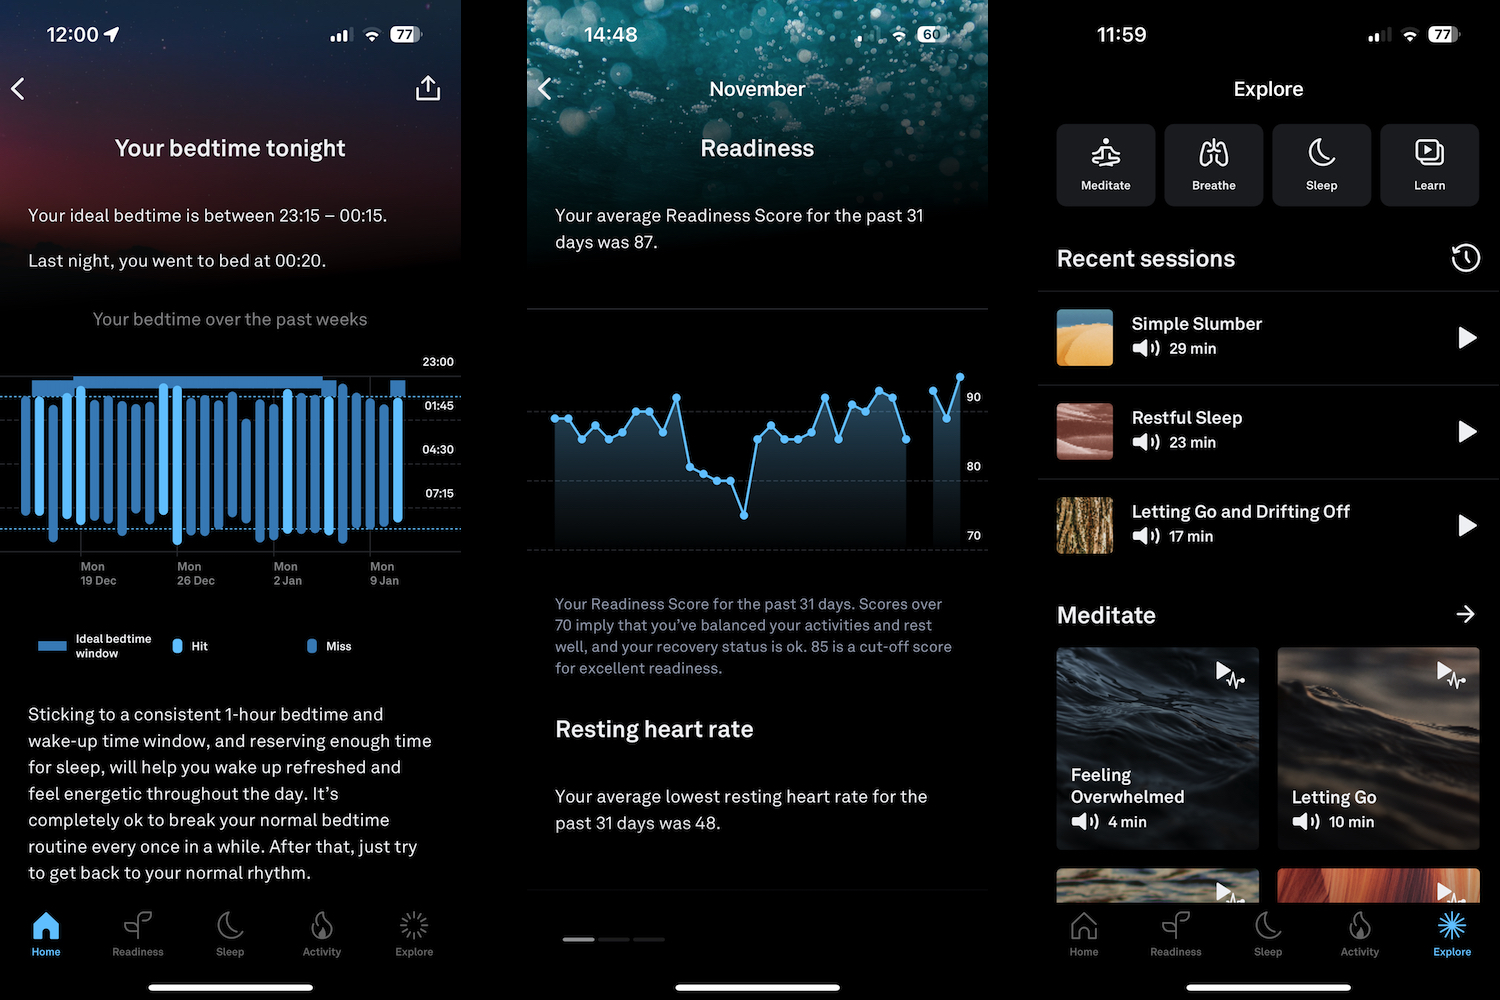 Screenshots showing the Oura Ring's app and data.